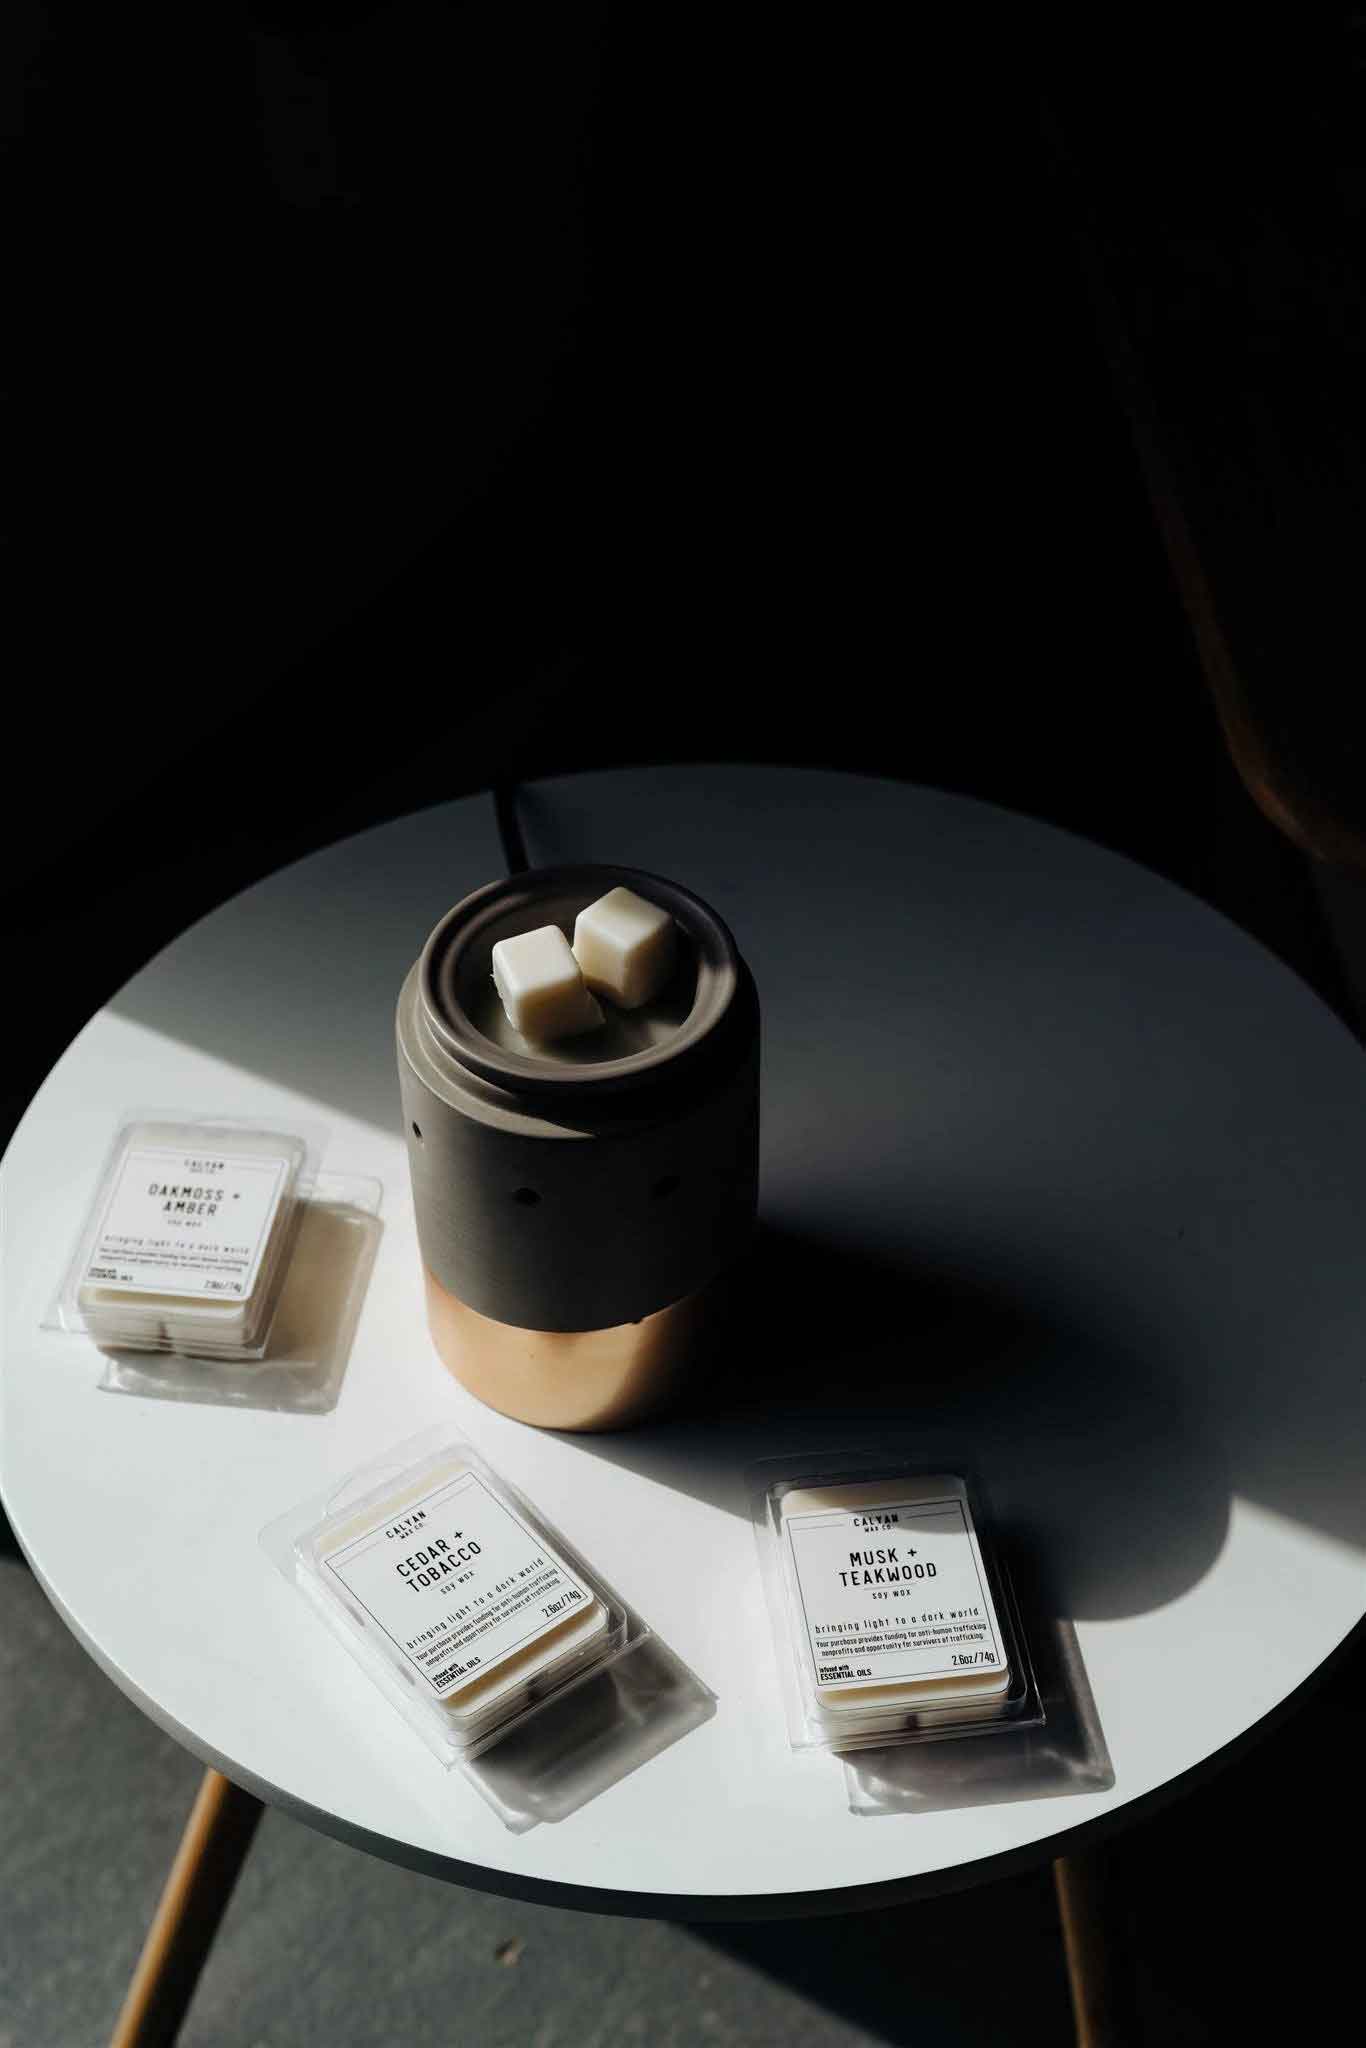 Wax Melts Lifestyle Image With Wax Melter Cedar + Tobacco Scent Calyan Wax Co.